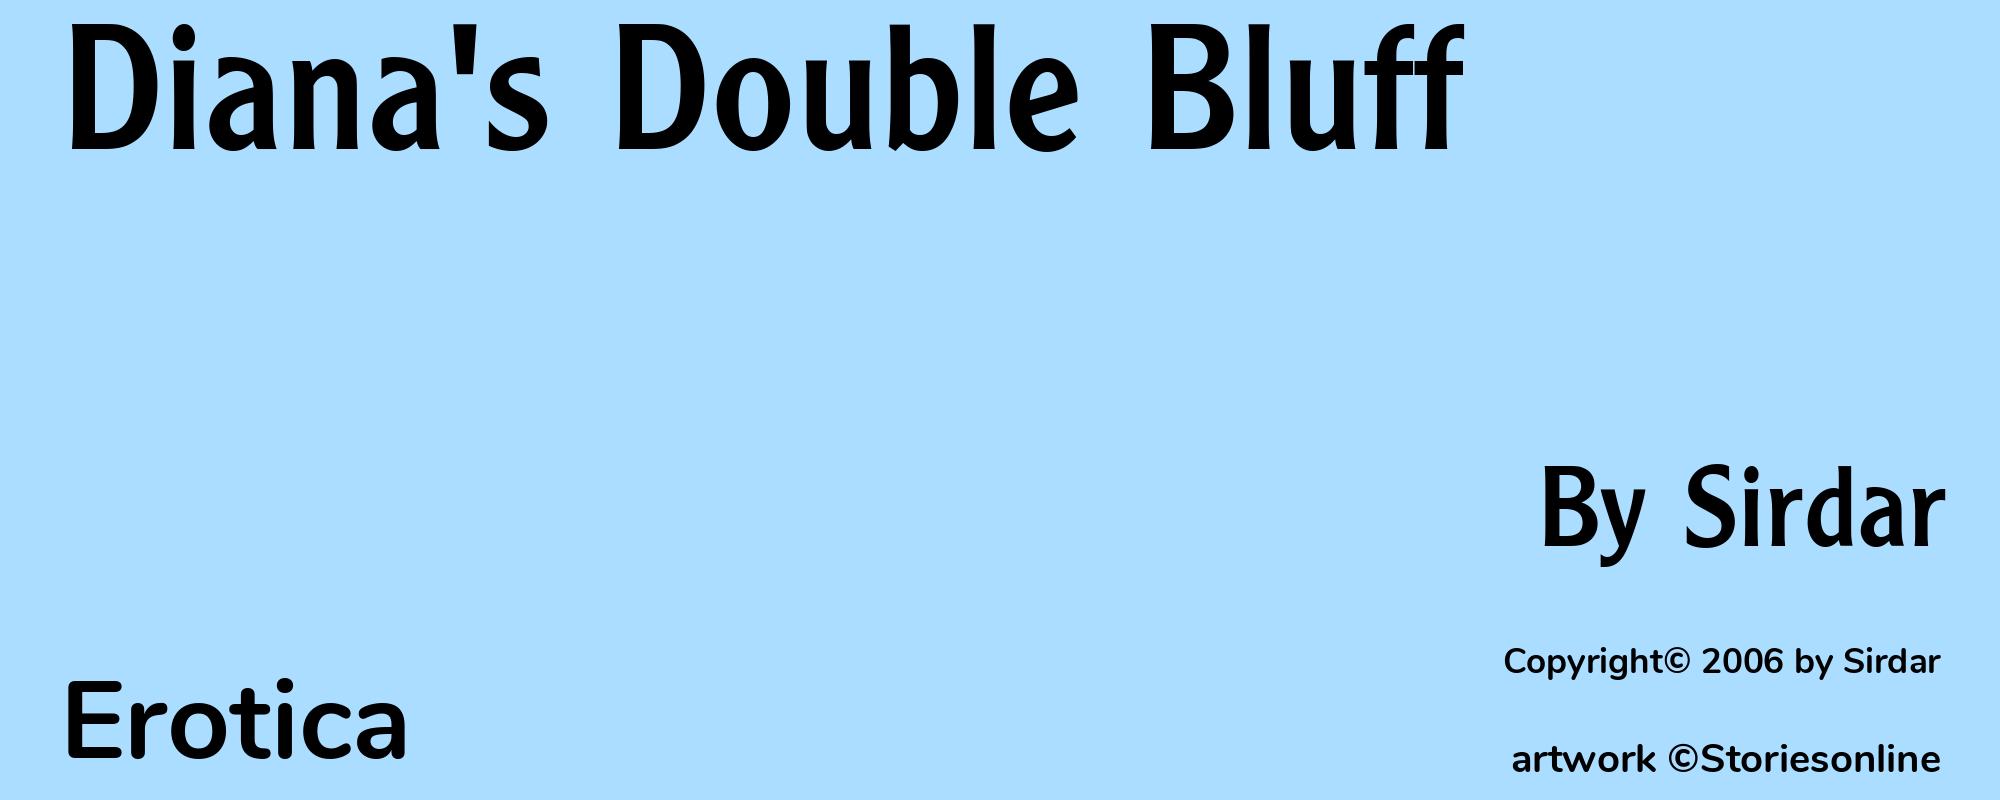 Diana's Double Bluff - Cover